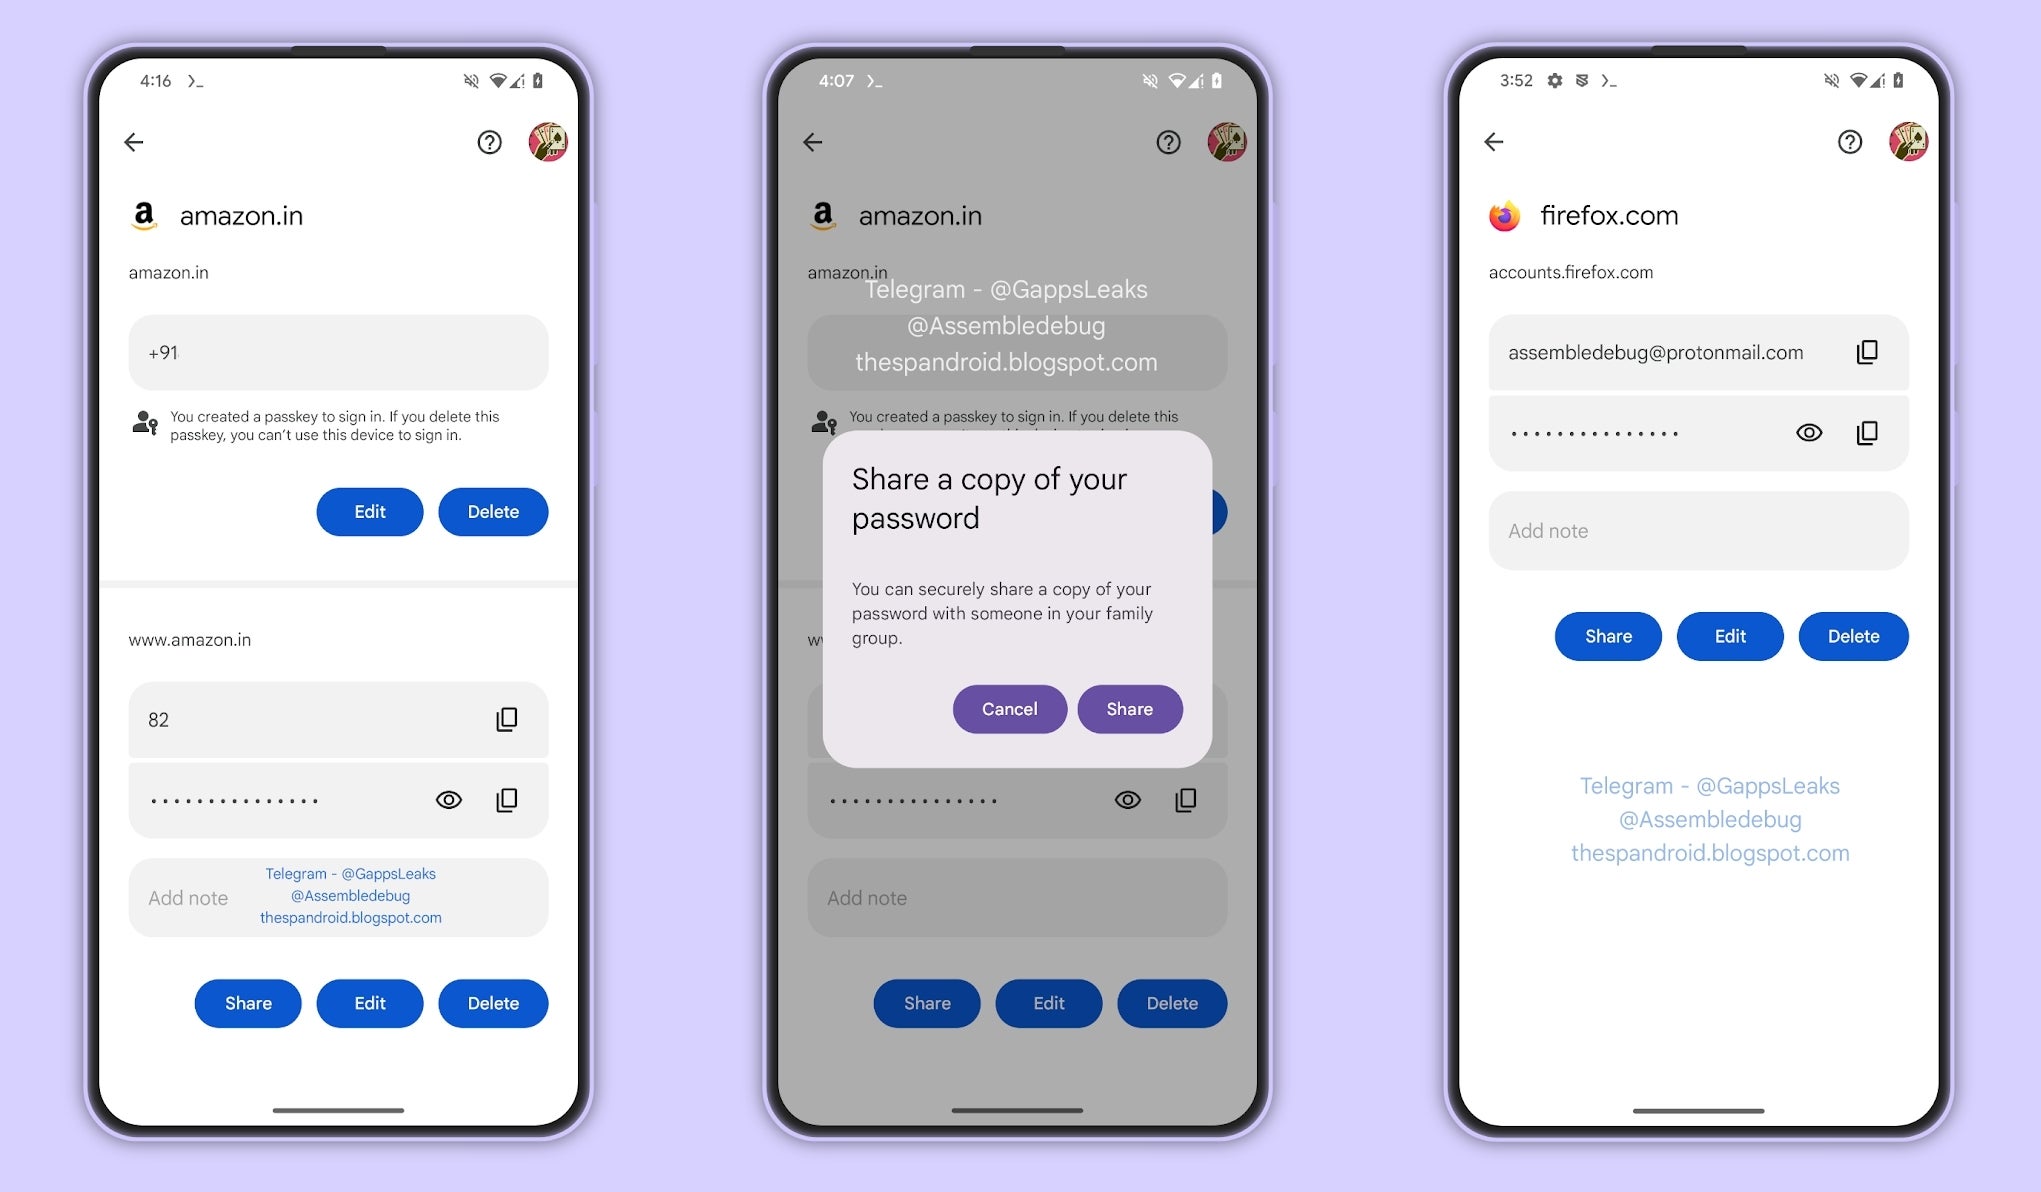 Google Password manager on Android could soon allow you to safely share passwords with your family